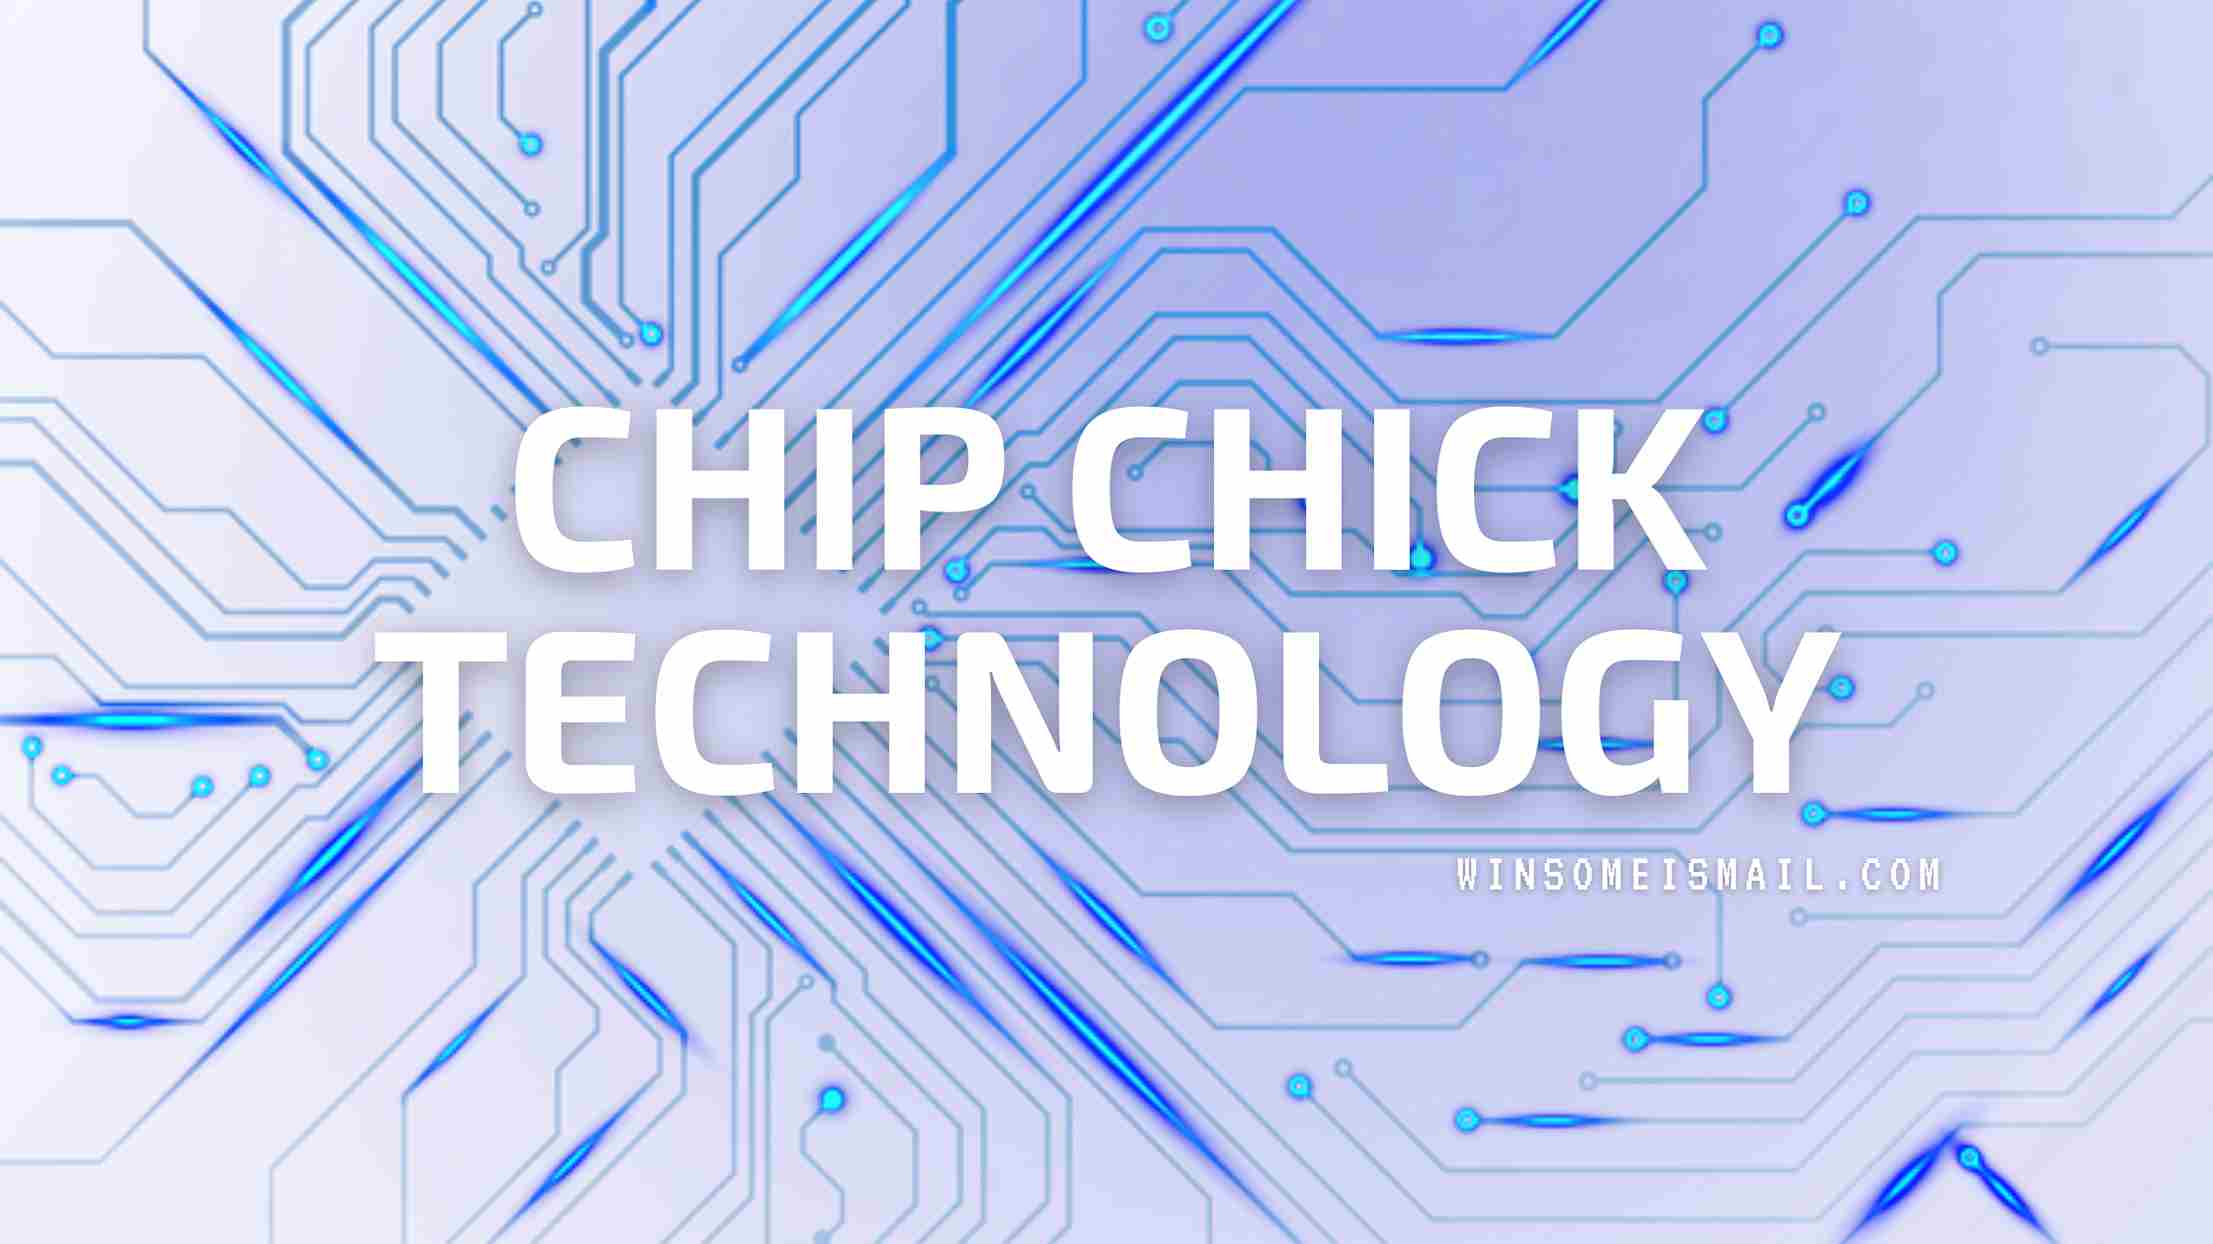 Chip chick technology, chip chick gadgets, chip chick gadgets for women, best chip chick technology, Chip Chick technology and gadgets for women, E-Reader, Anker powercore fusion, earbuds, sonicbrush,